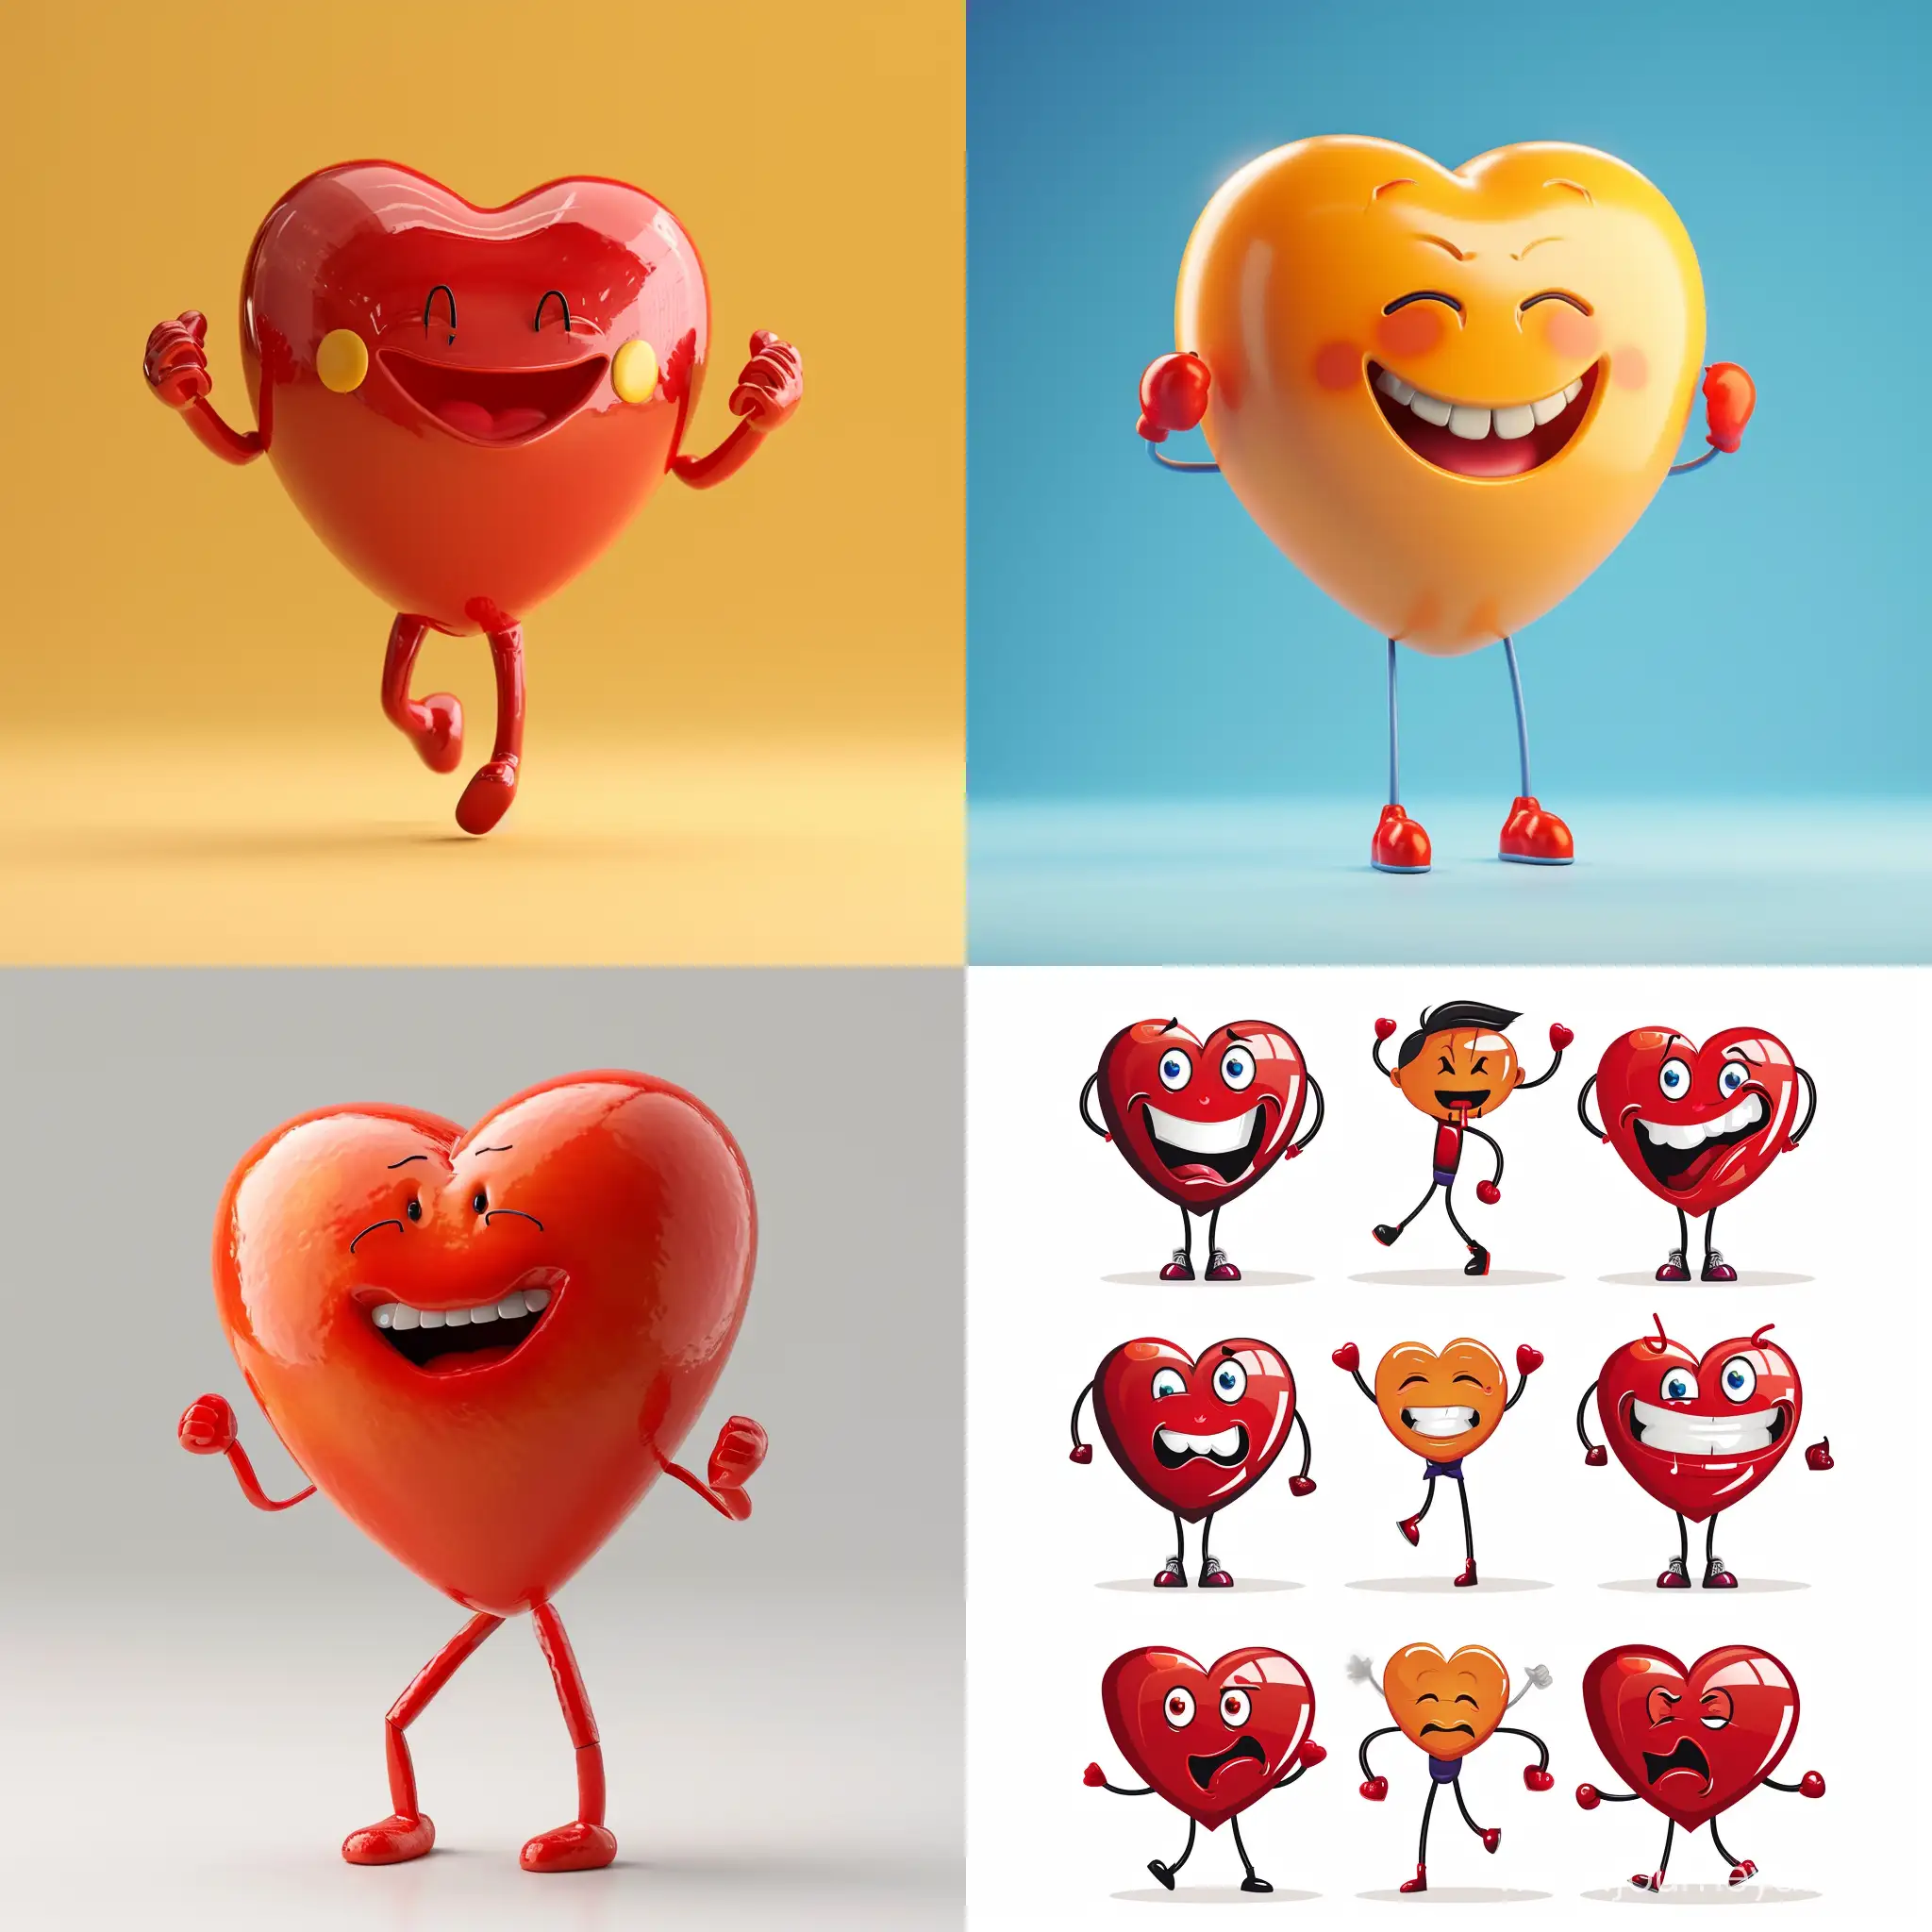 Expressive-Smiley-and-Heart-Characters-with-Various-Emotions